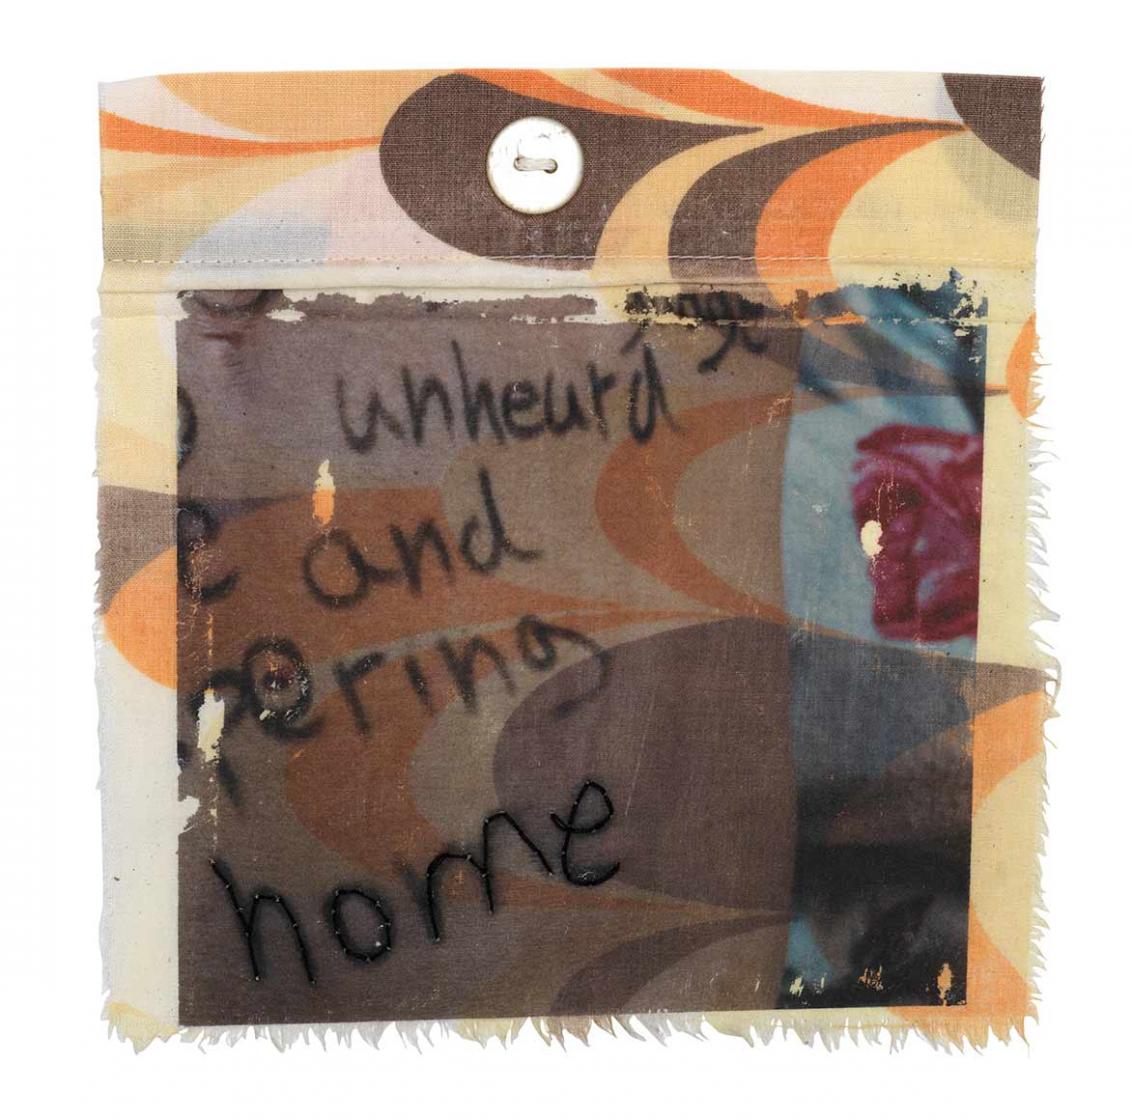 Nearly square piece of fabric from a used duvet cover with fraying edges and a multicolored “swoop” pattern with English words written on it, including the word “home” traced over in thread